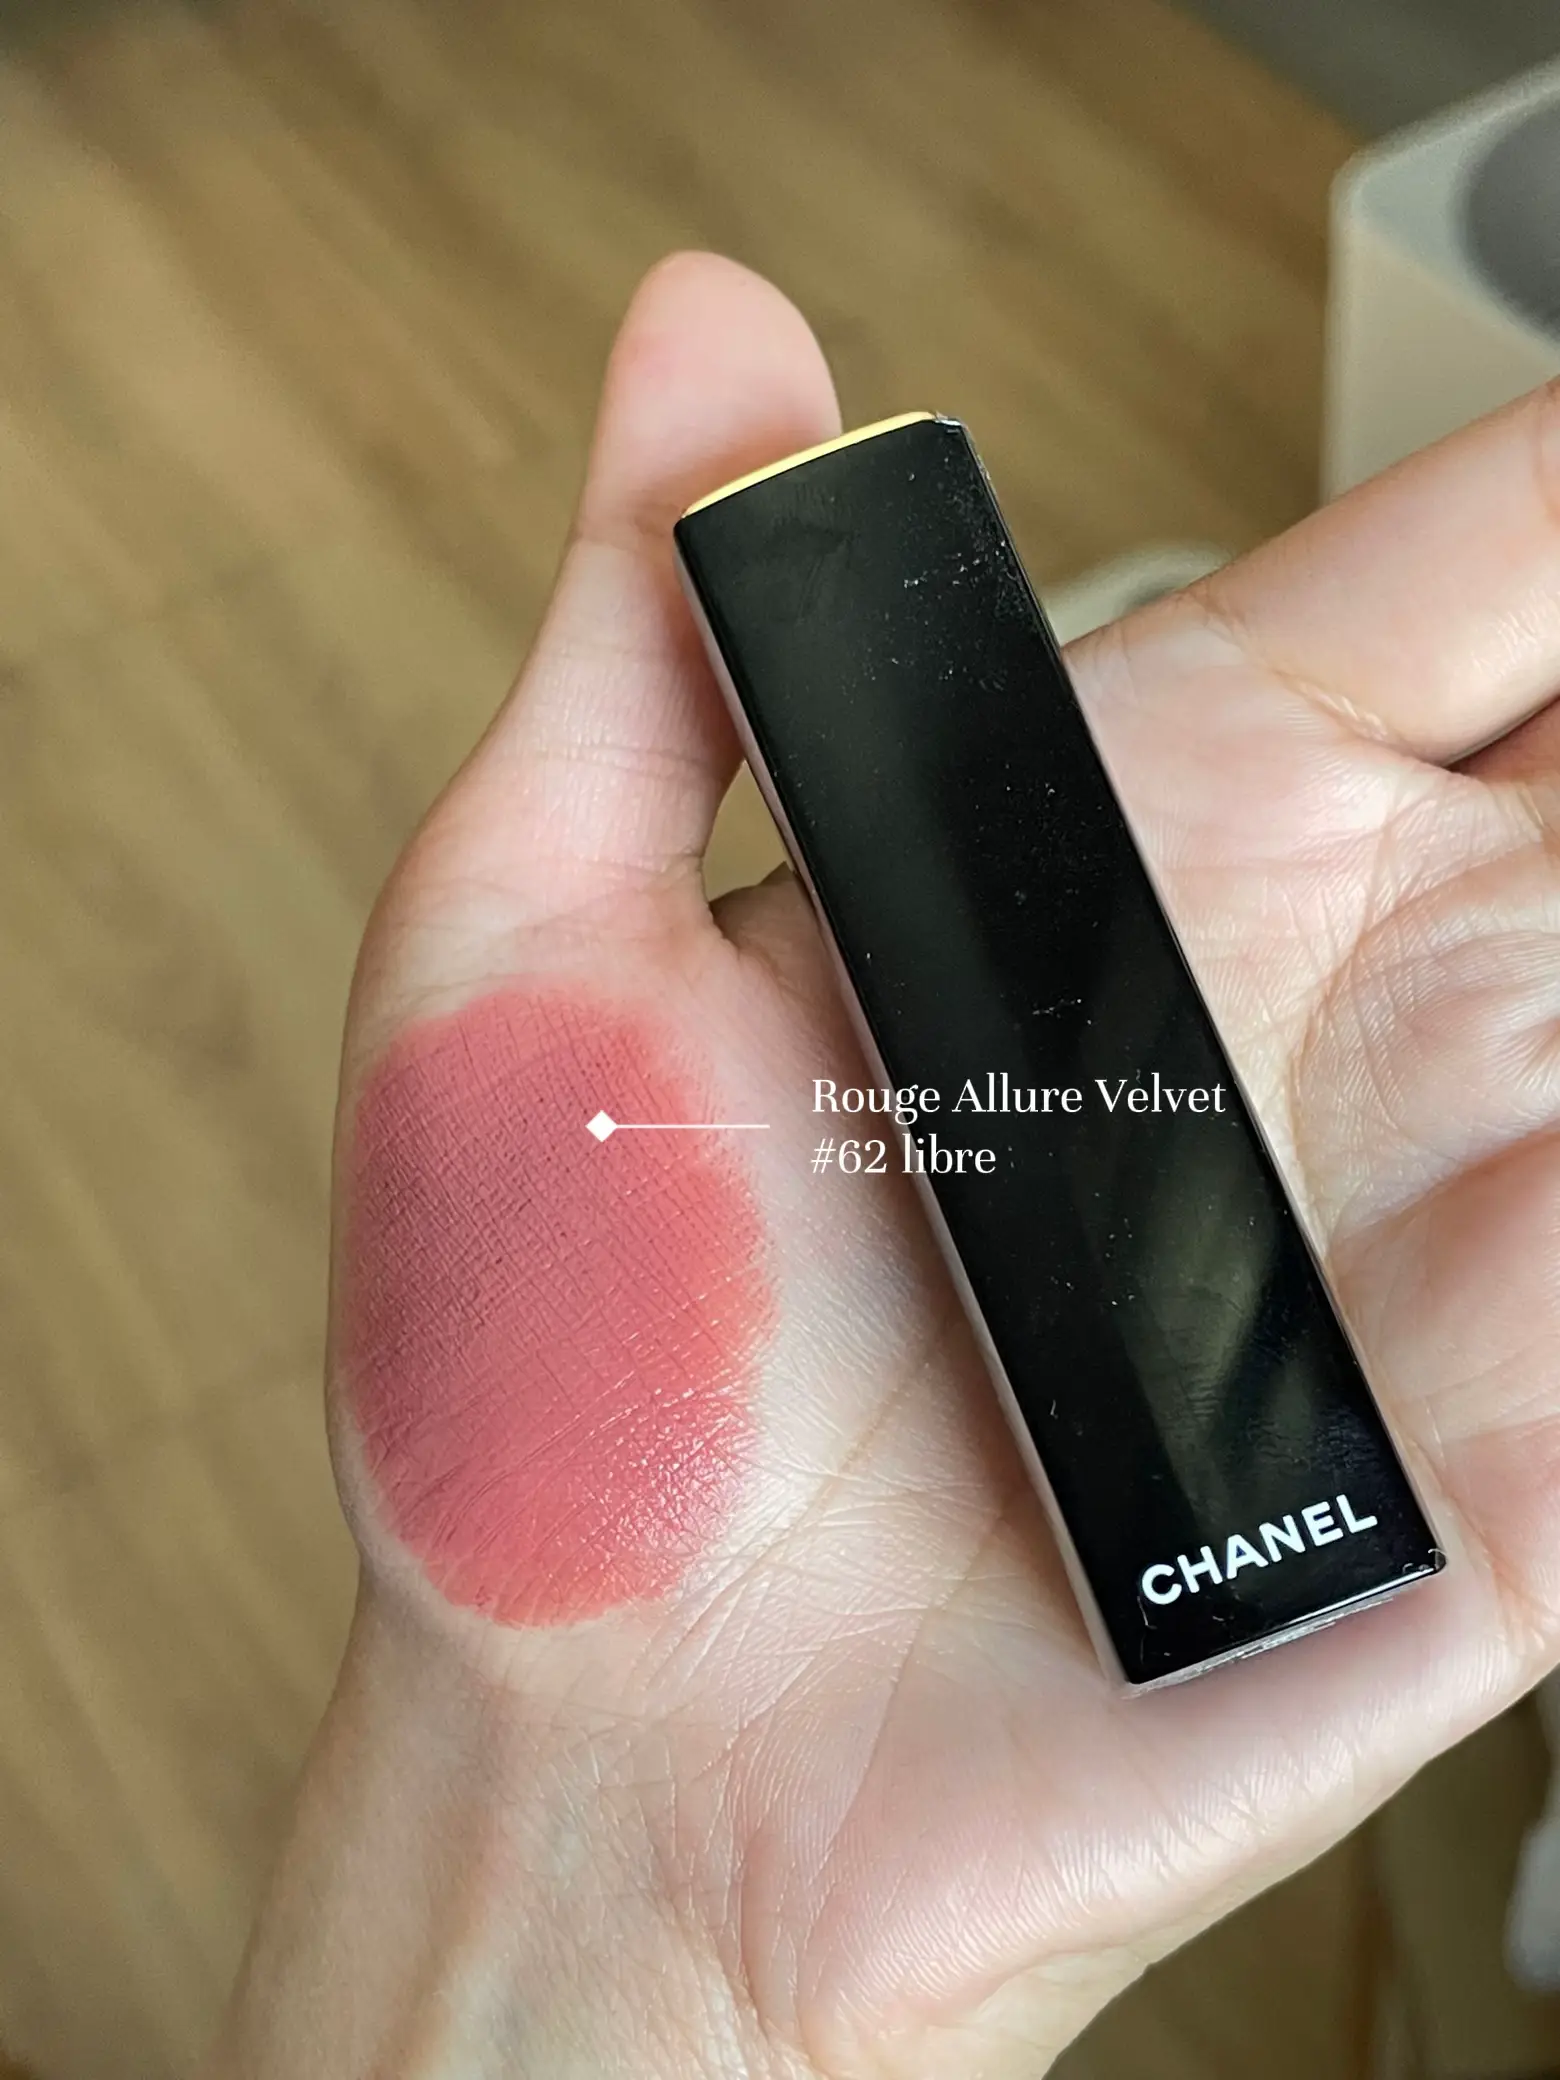 Chanel, Rouge Allure Velvet Extreme Lipstick: Review and Swatches